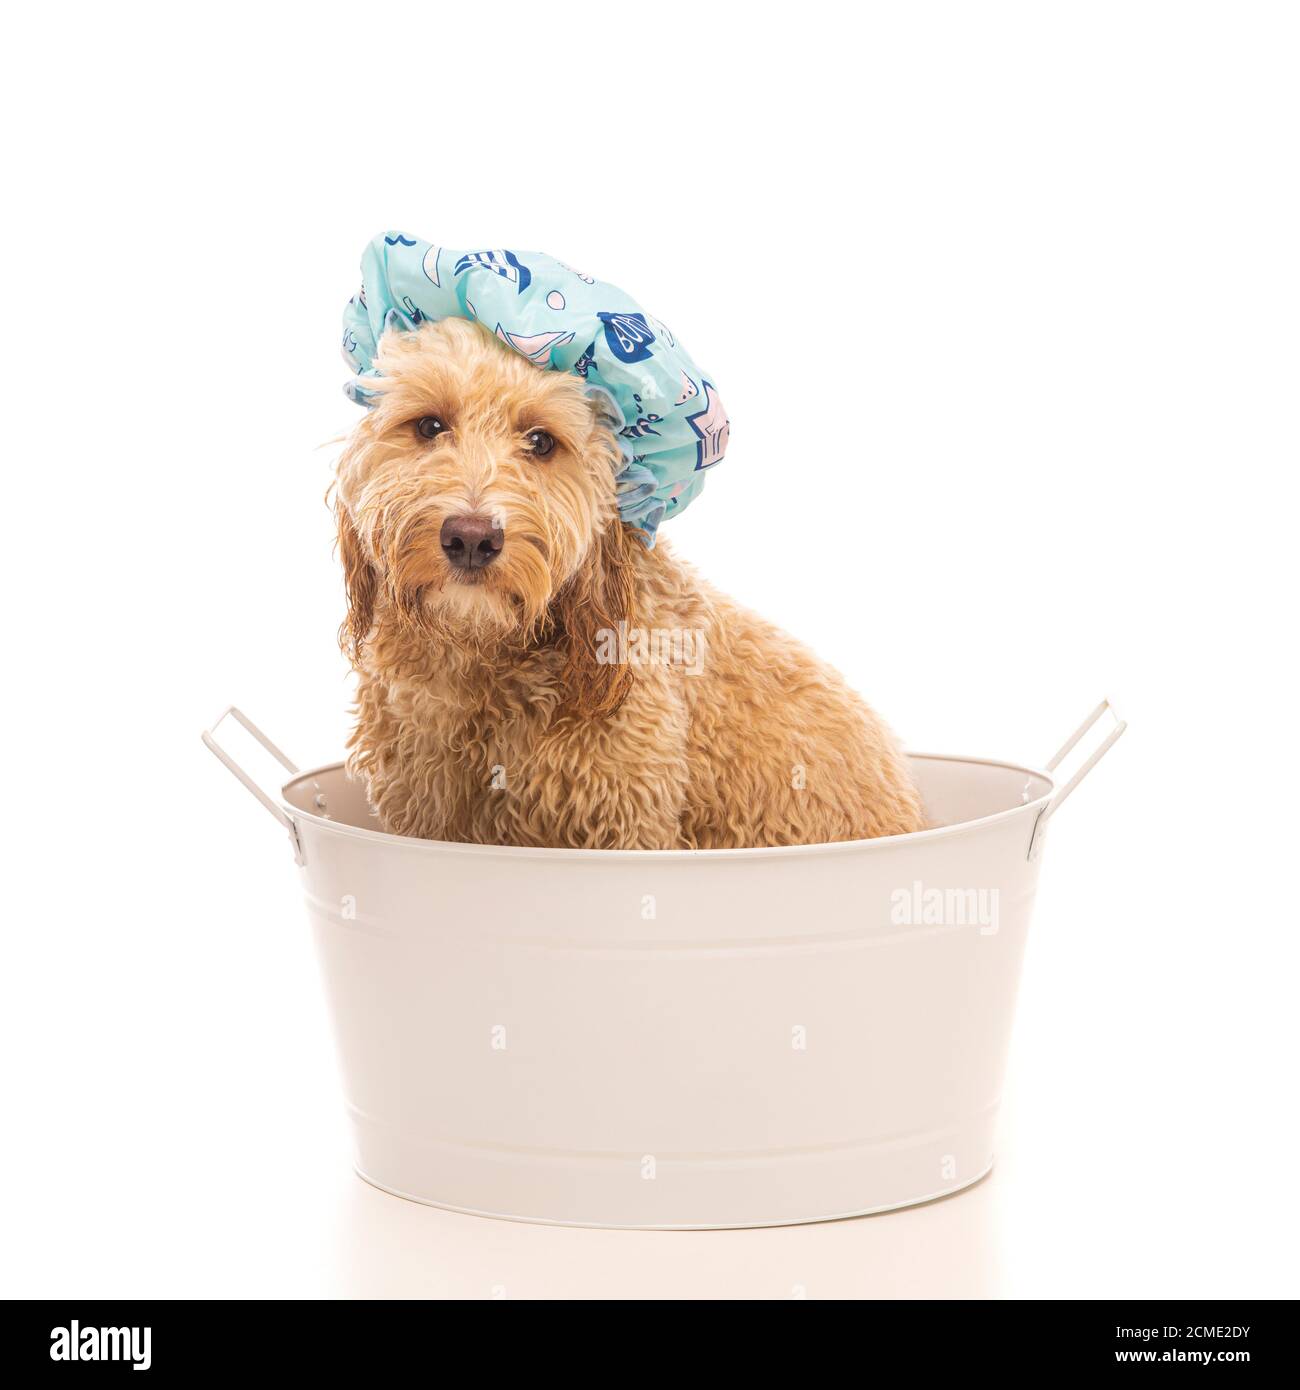 Cockapoo dog wearing shower cap sat in white tin bath on white background with copy space. Stock Photo